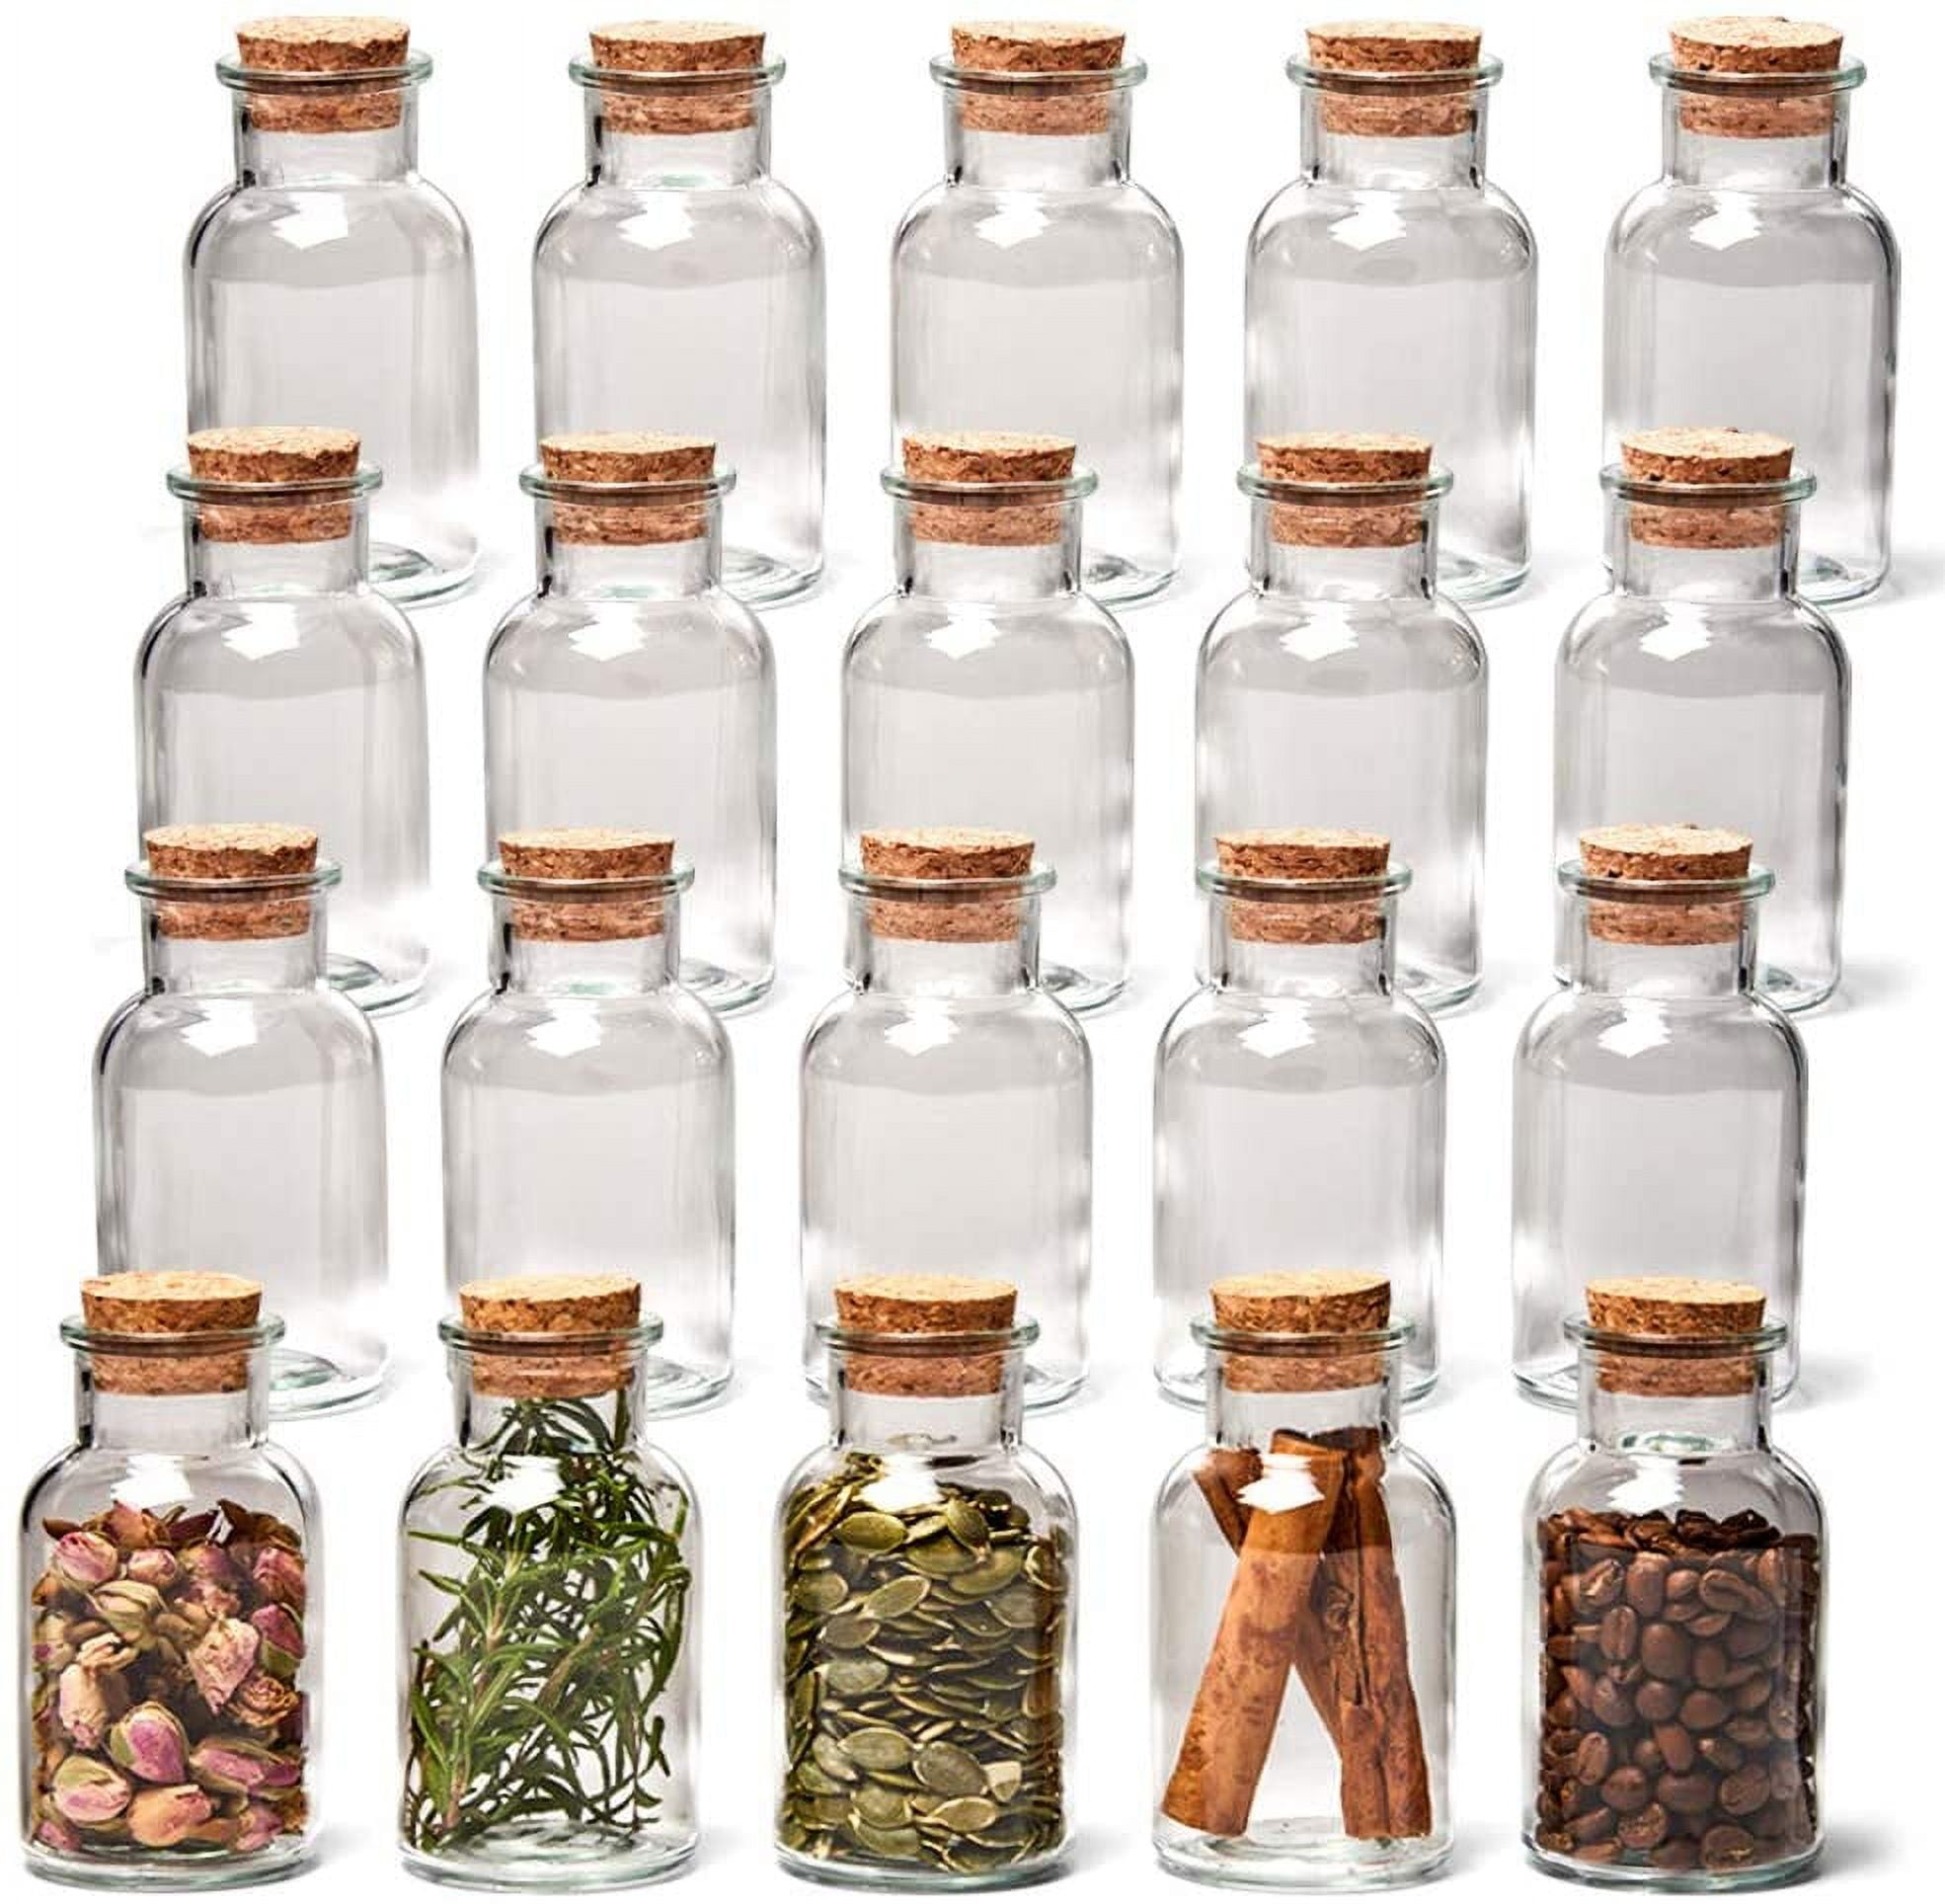 APOTHECARY BOTTLE / SPICE JARS (150ml/5oz) for Kitchen, Pantry